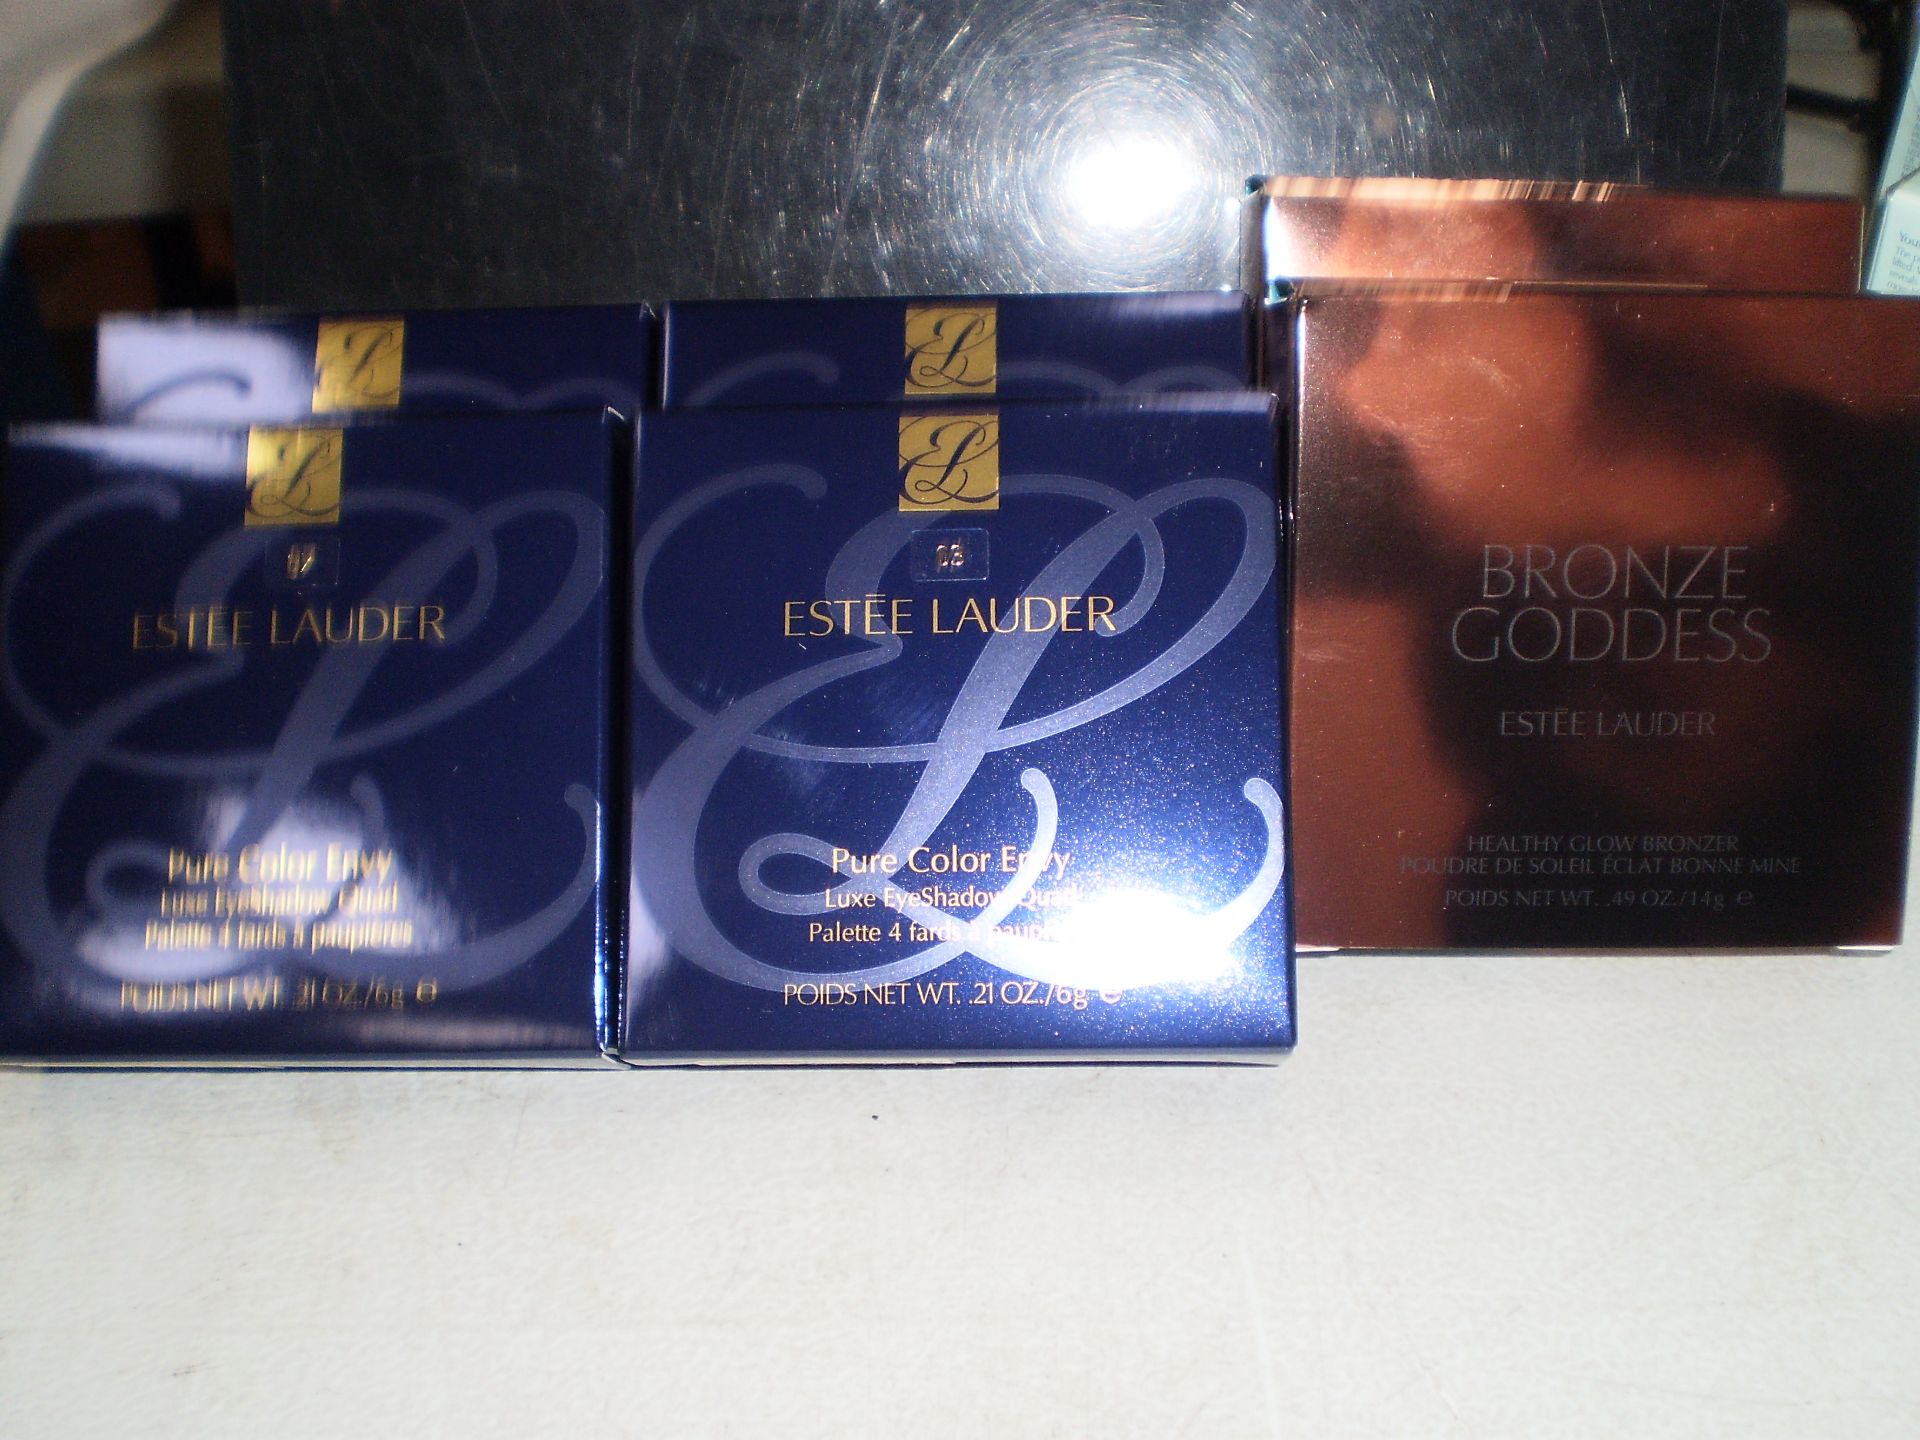 6 x items of Estee Lauder comprising 4 x eye shadow quad palettes, shade 2, 3 & 7, and 2 x bronze